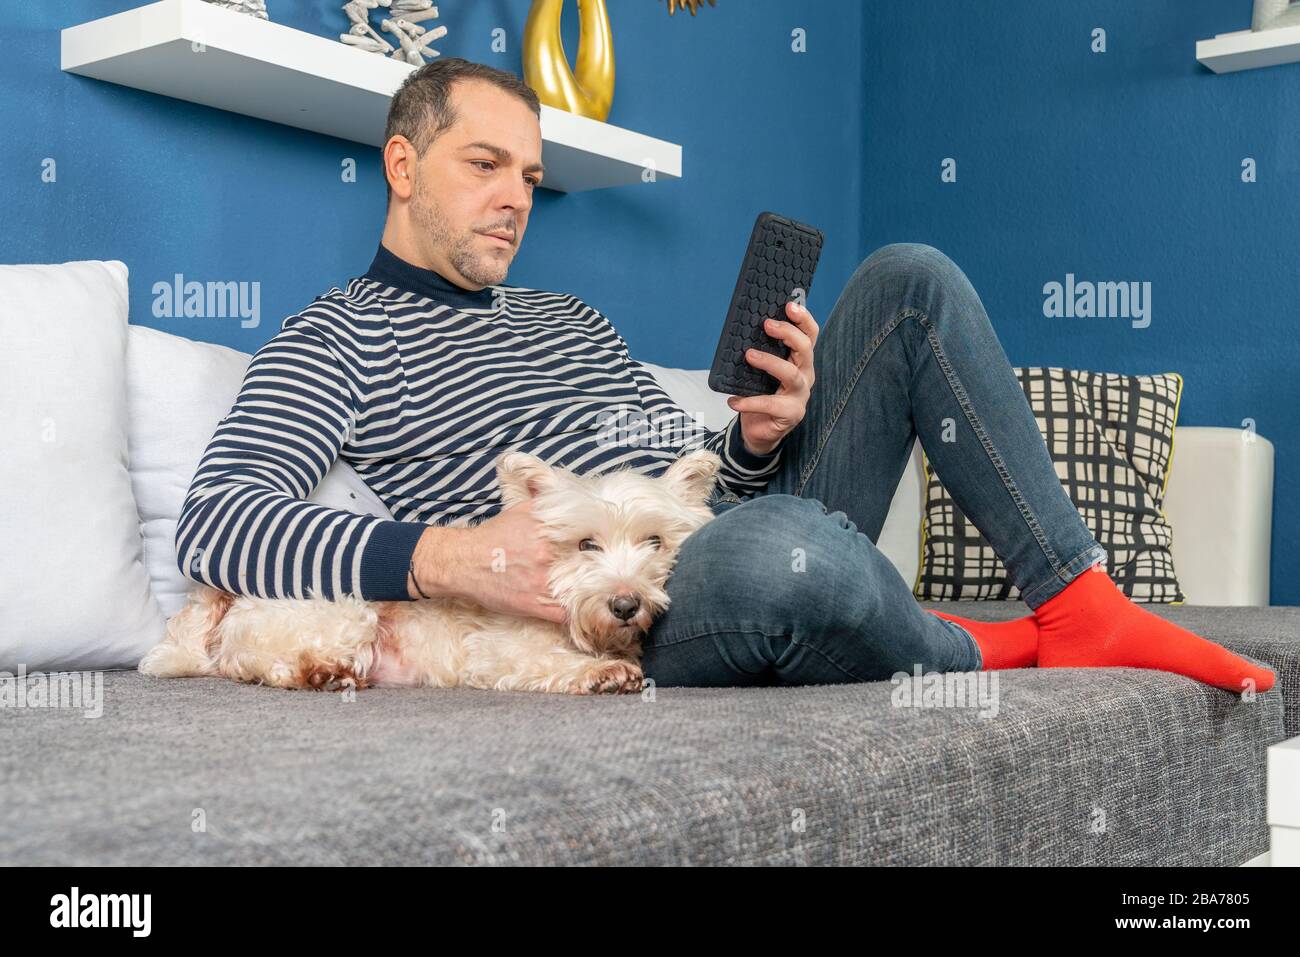 a man relaxes with his dog on the couch Stock Photo